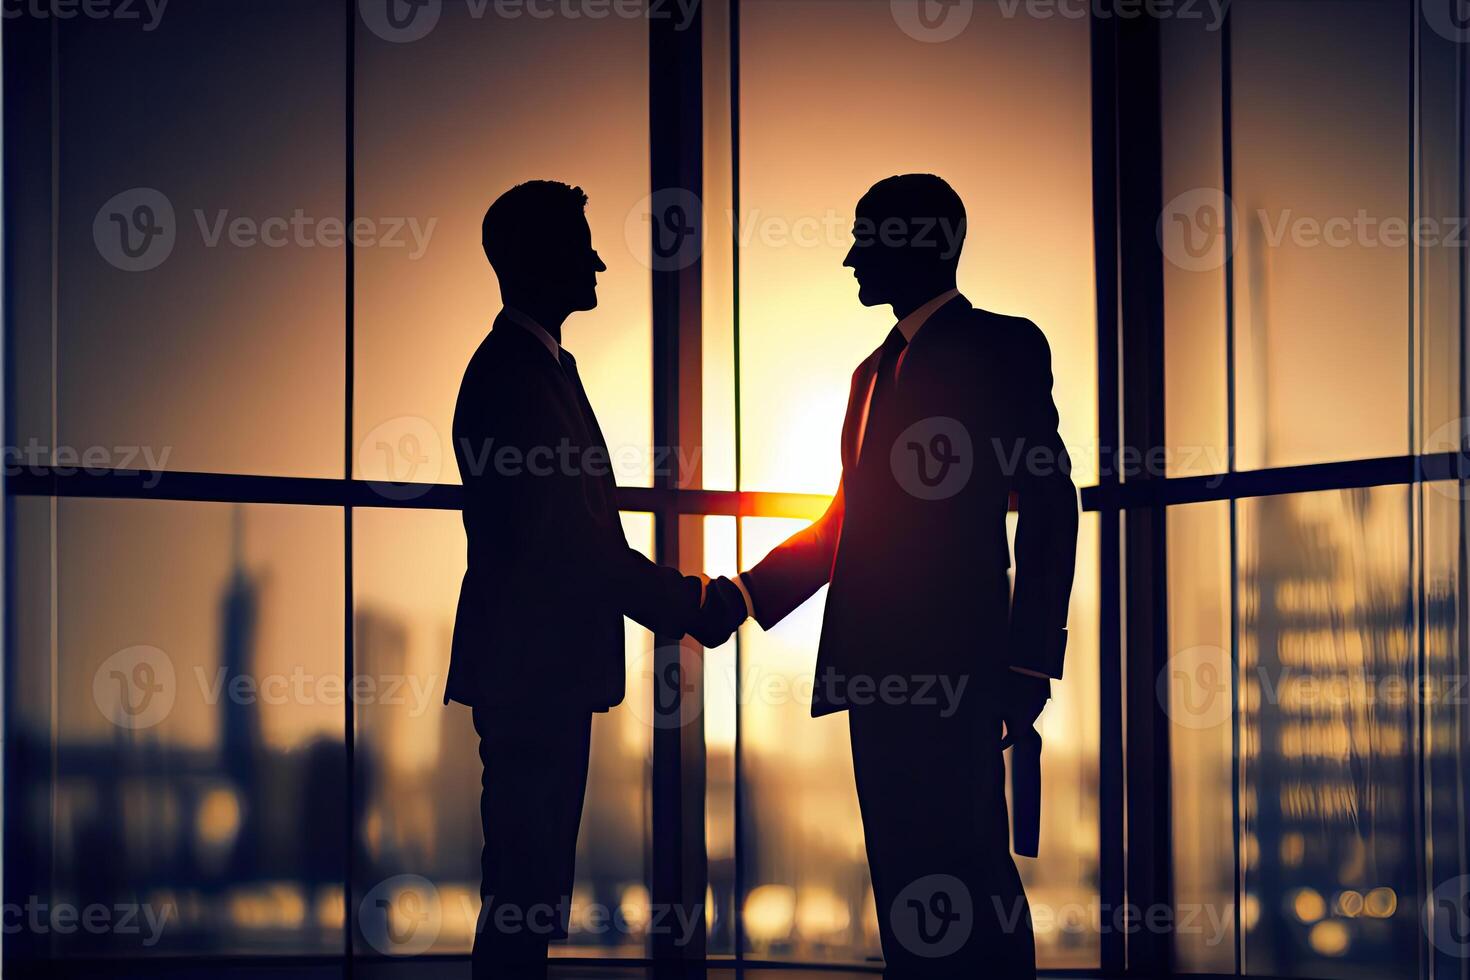 business people shaking hands photo